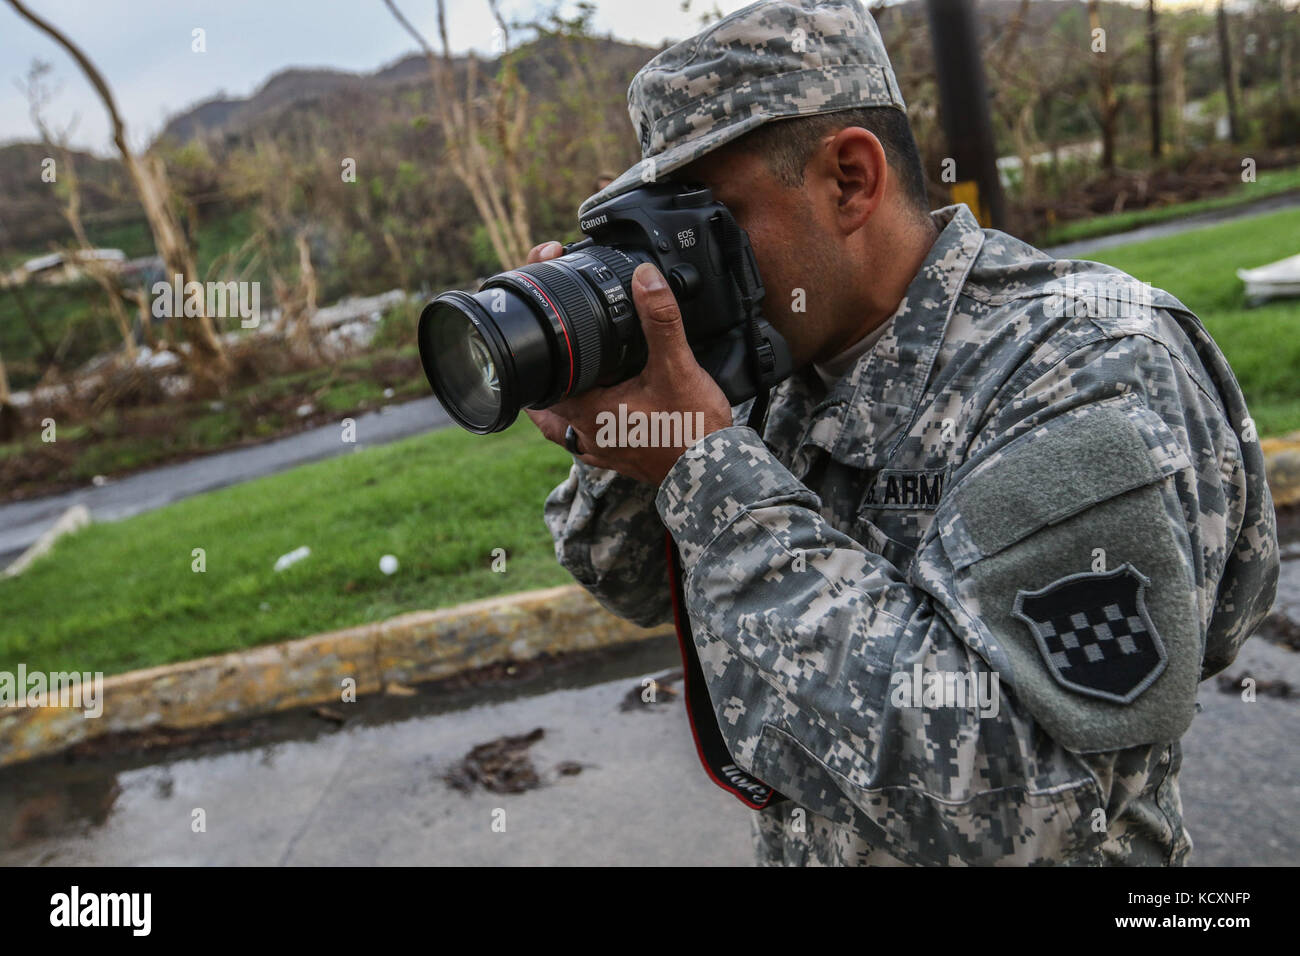 U.S. Army Reserve soldier, Sgt. Edgar Valdez, 220th Public Affairs Detachment, takes photos during a food delivery mission, which is part of Hurricane Maria relief efforts, outside of San Juan, Puerto Rico on Oct. 6, 2017. Valdez is part of a public affairs team that has spent the past several days working with Army Reserve soldiers, under the guidance and request of civil authorities, who are providing much needed supplies and resources to all of Puerto Rico. America’s Army Reserve can provide logistical, medical, and engineering support within hours of a disaster. Valdez is a public affairs  Stock Photo